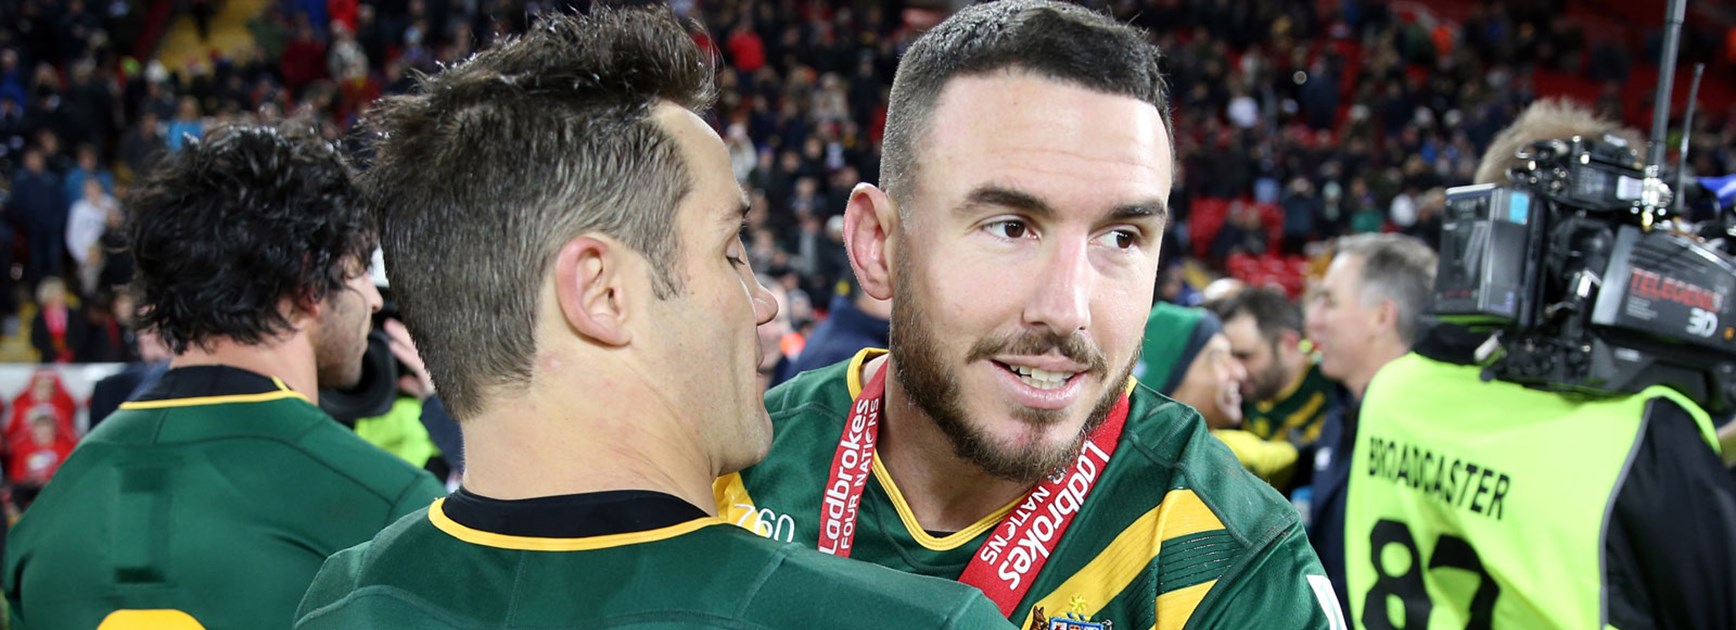 Darius Boyd was named Man of the Match in the 2016 Four Nations Final.